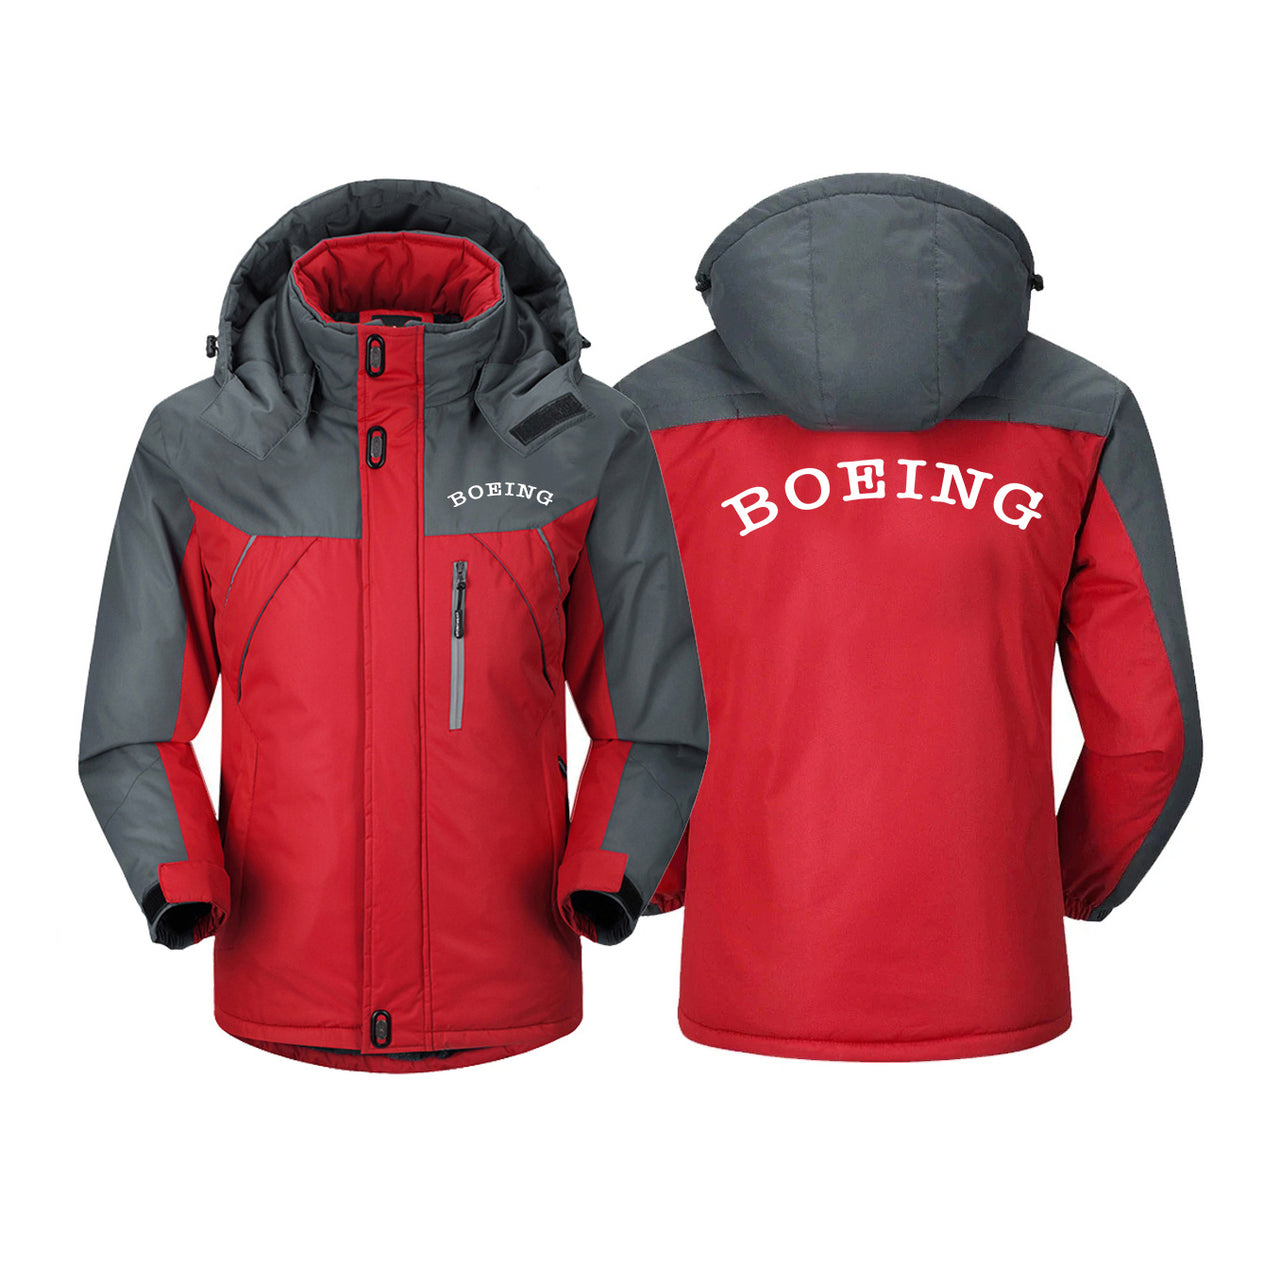 Special BOEING Text Designed Thick Winter Jackets